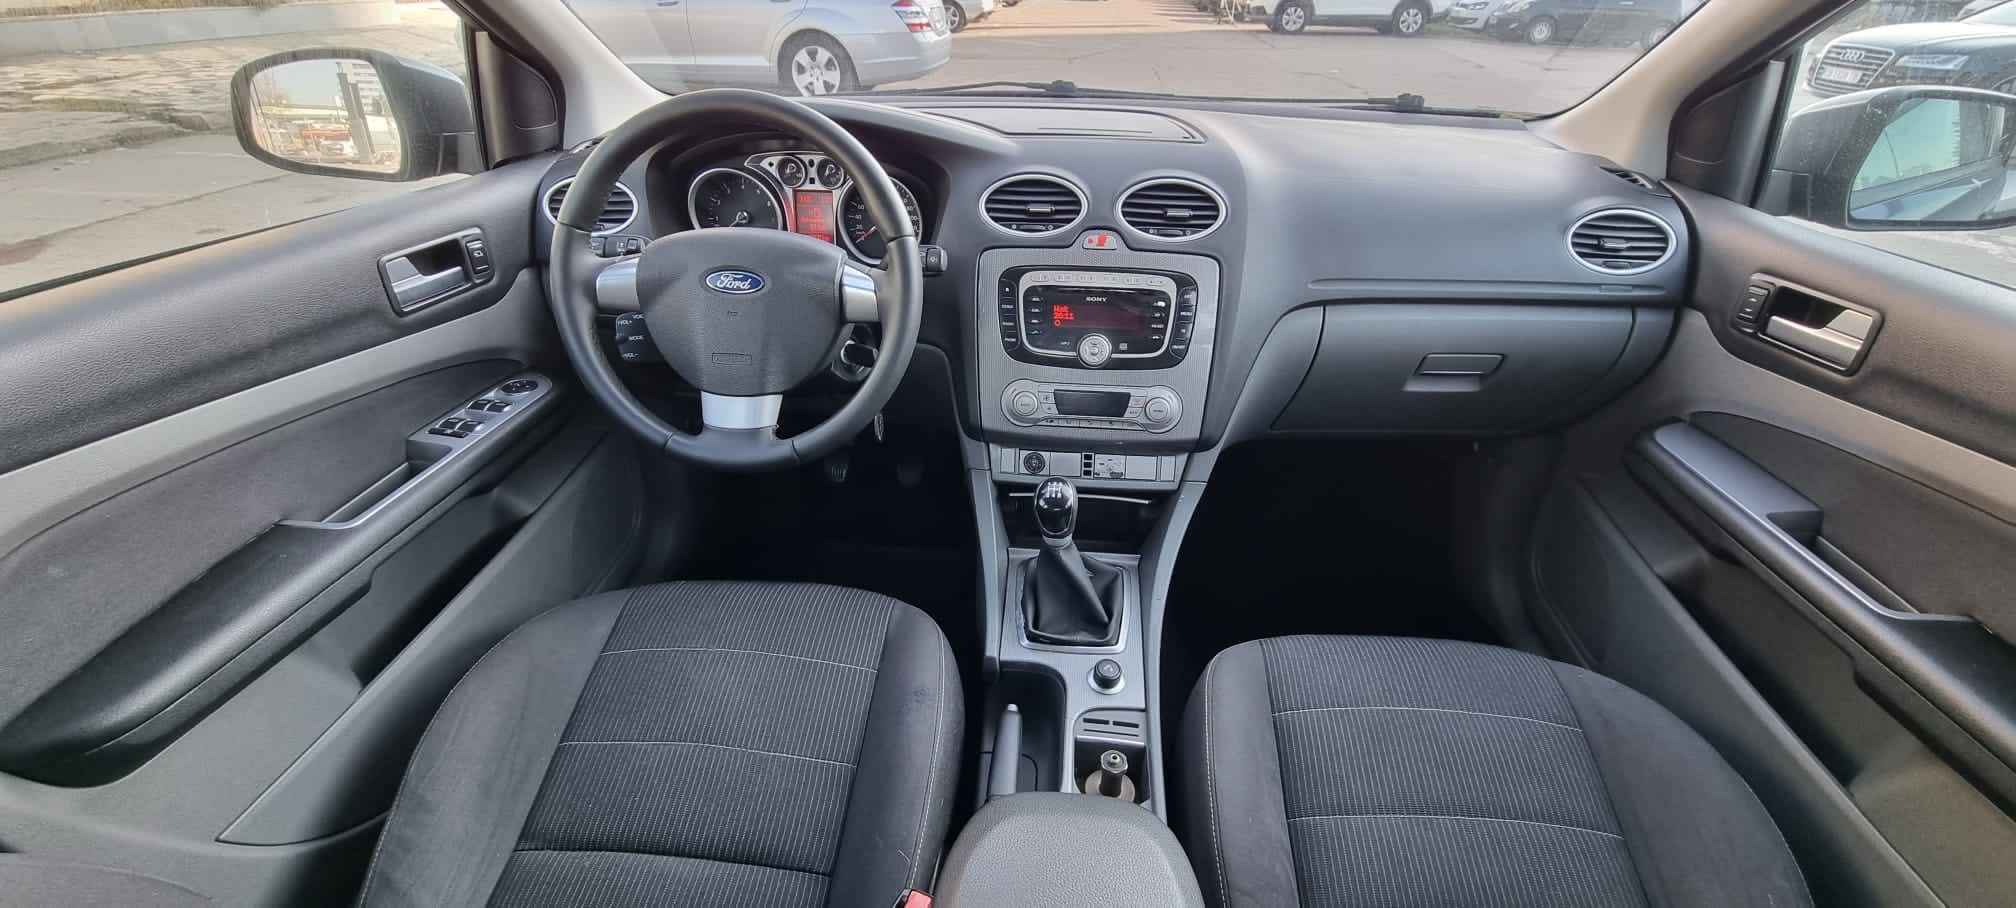 Ford Focus 1.8i Gas